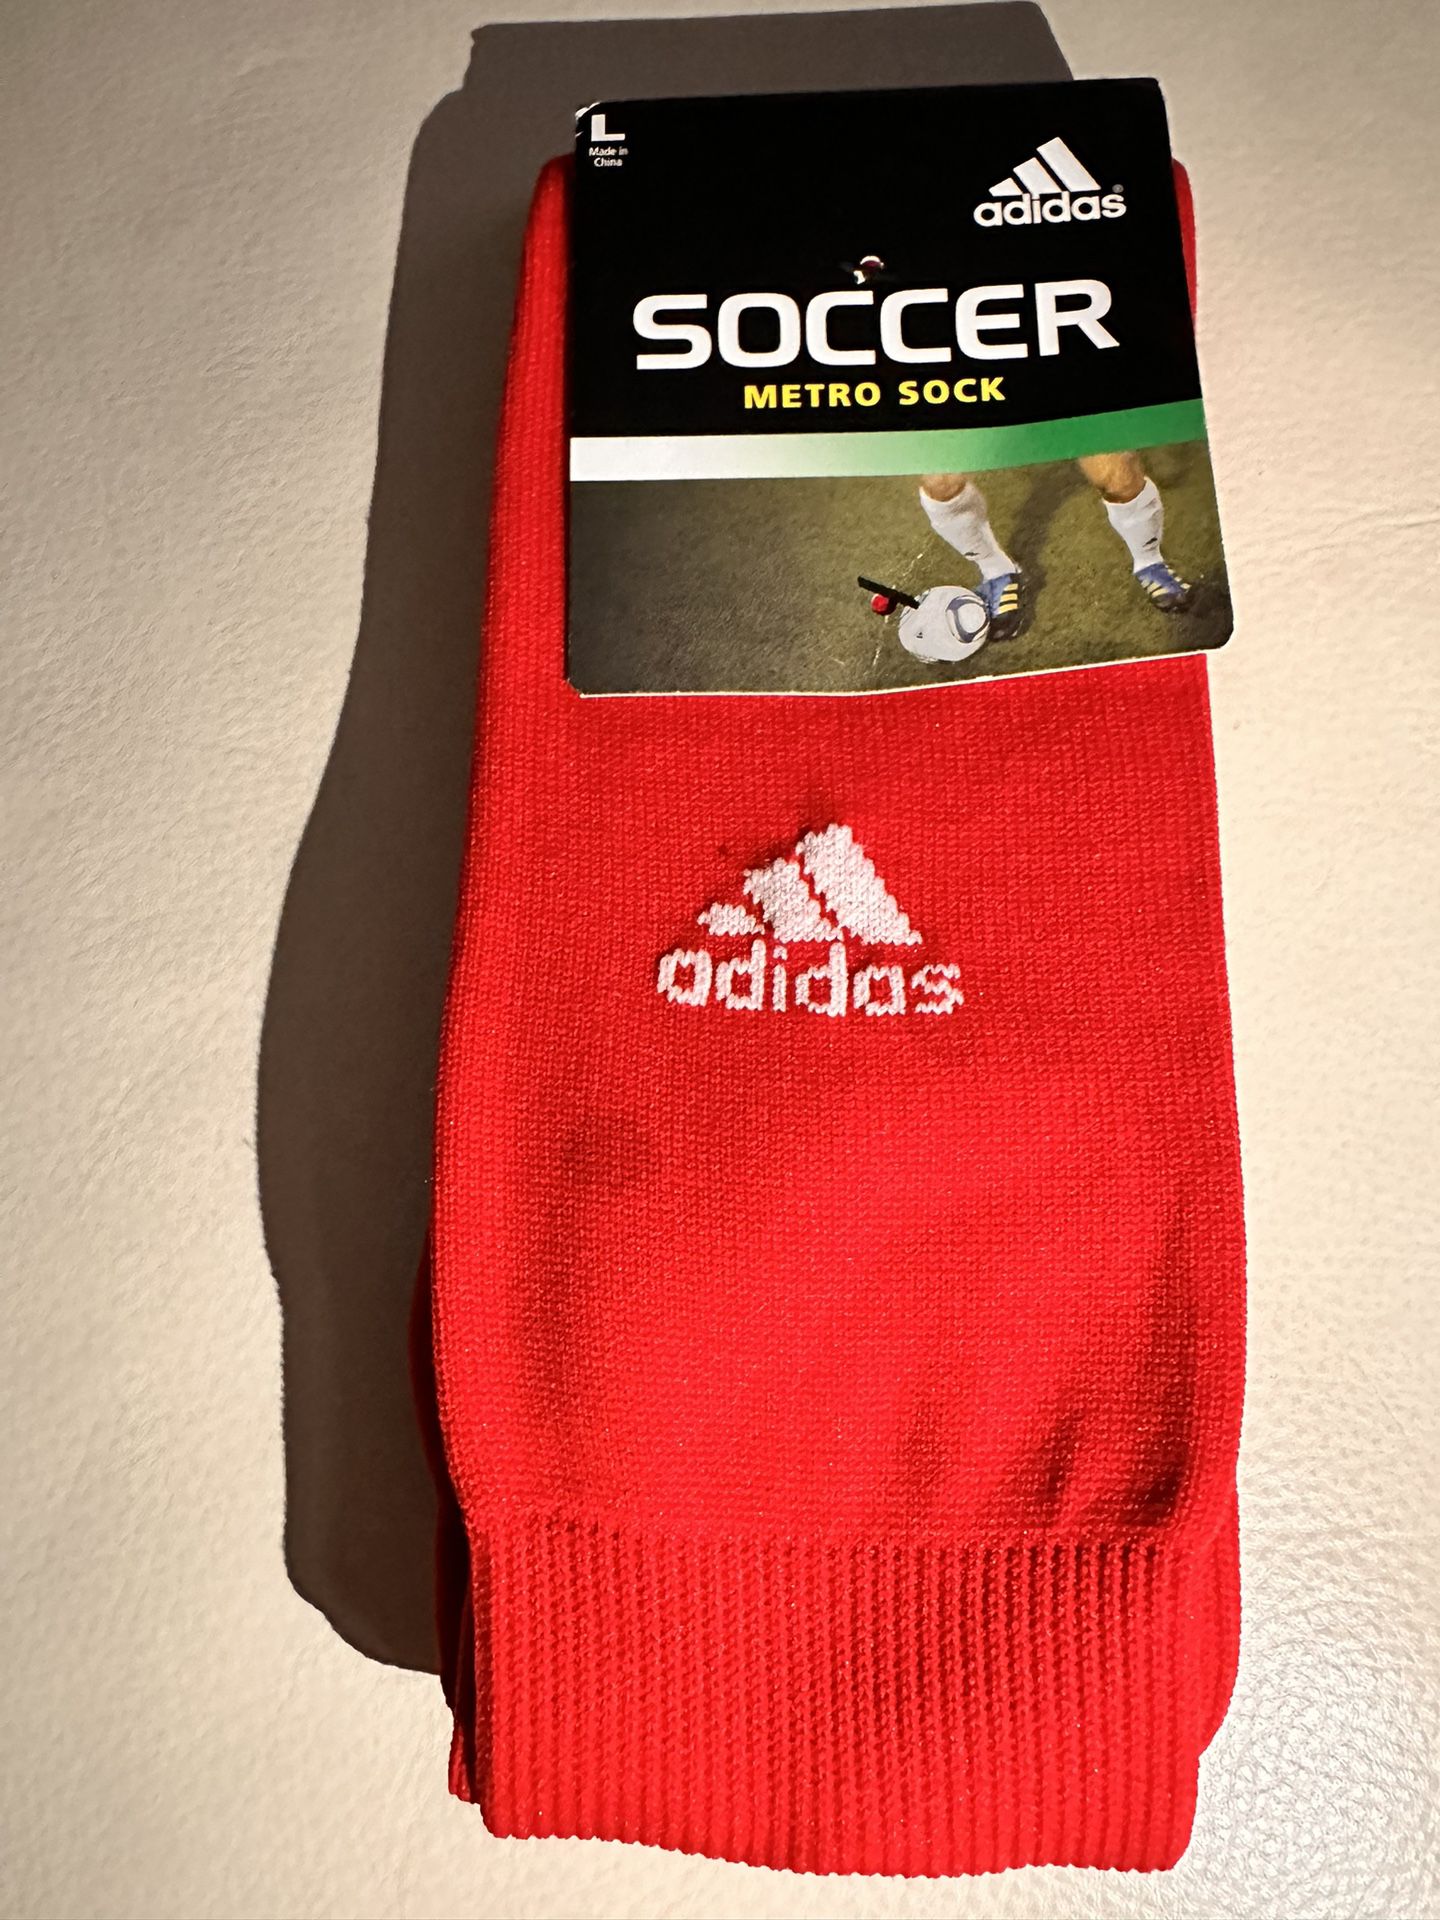 ADIDAS UNISEX- ADULT METRO SOCK Socks (1 PAIR SIZE L) SOCCER. ARCH & ANKLE COMPRESSION. RED  89% nylon, 8% polyester, 2% natural latex rubber, 1% span